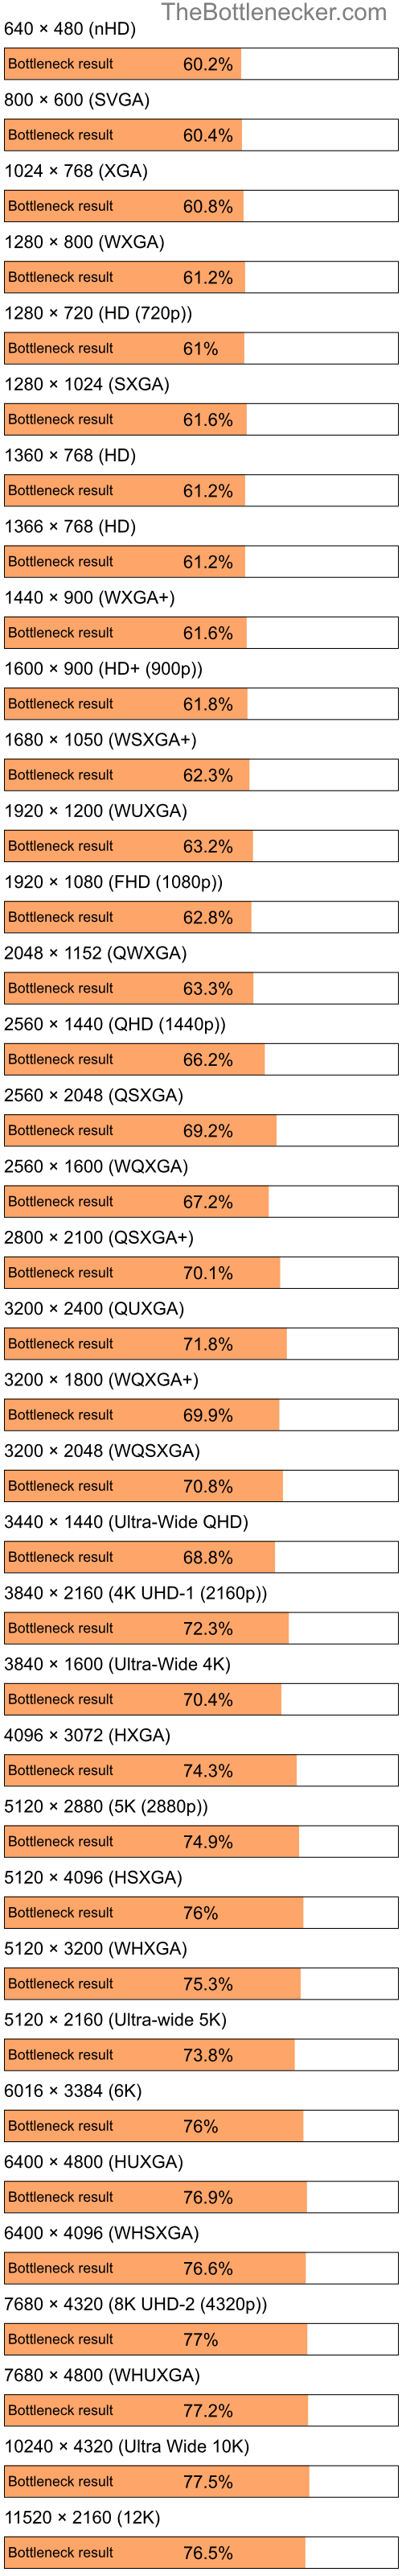 Bottleneck results by resolution for Intel Pentium 4 and AMD Mobility Radeon HD 4250 in7 Days to Die